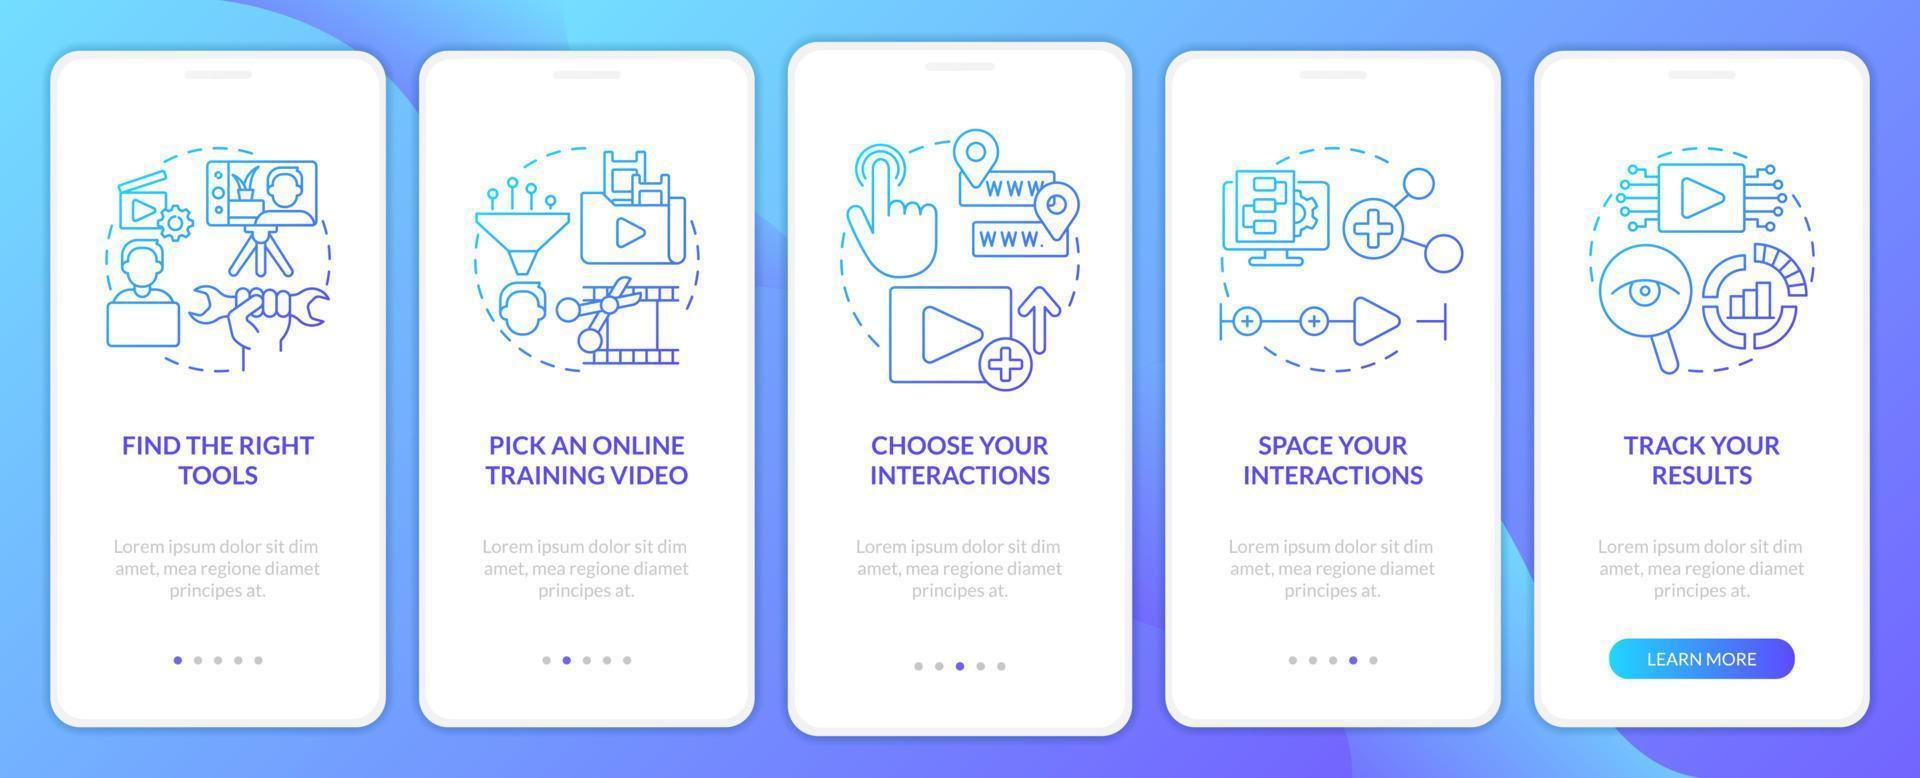 Creating educational video blue gradient onboarding mobile app screen. Walkthrough 5 steps graphic instructions with linear concepts. UI, UX, GUI template. vector